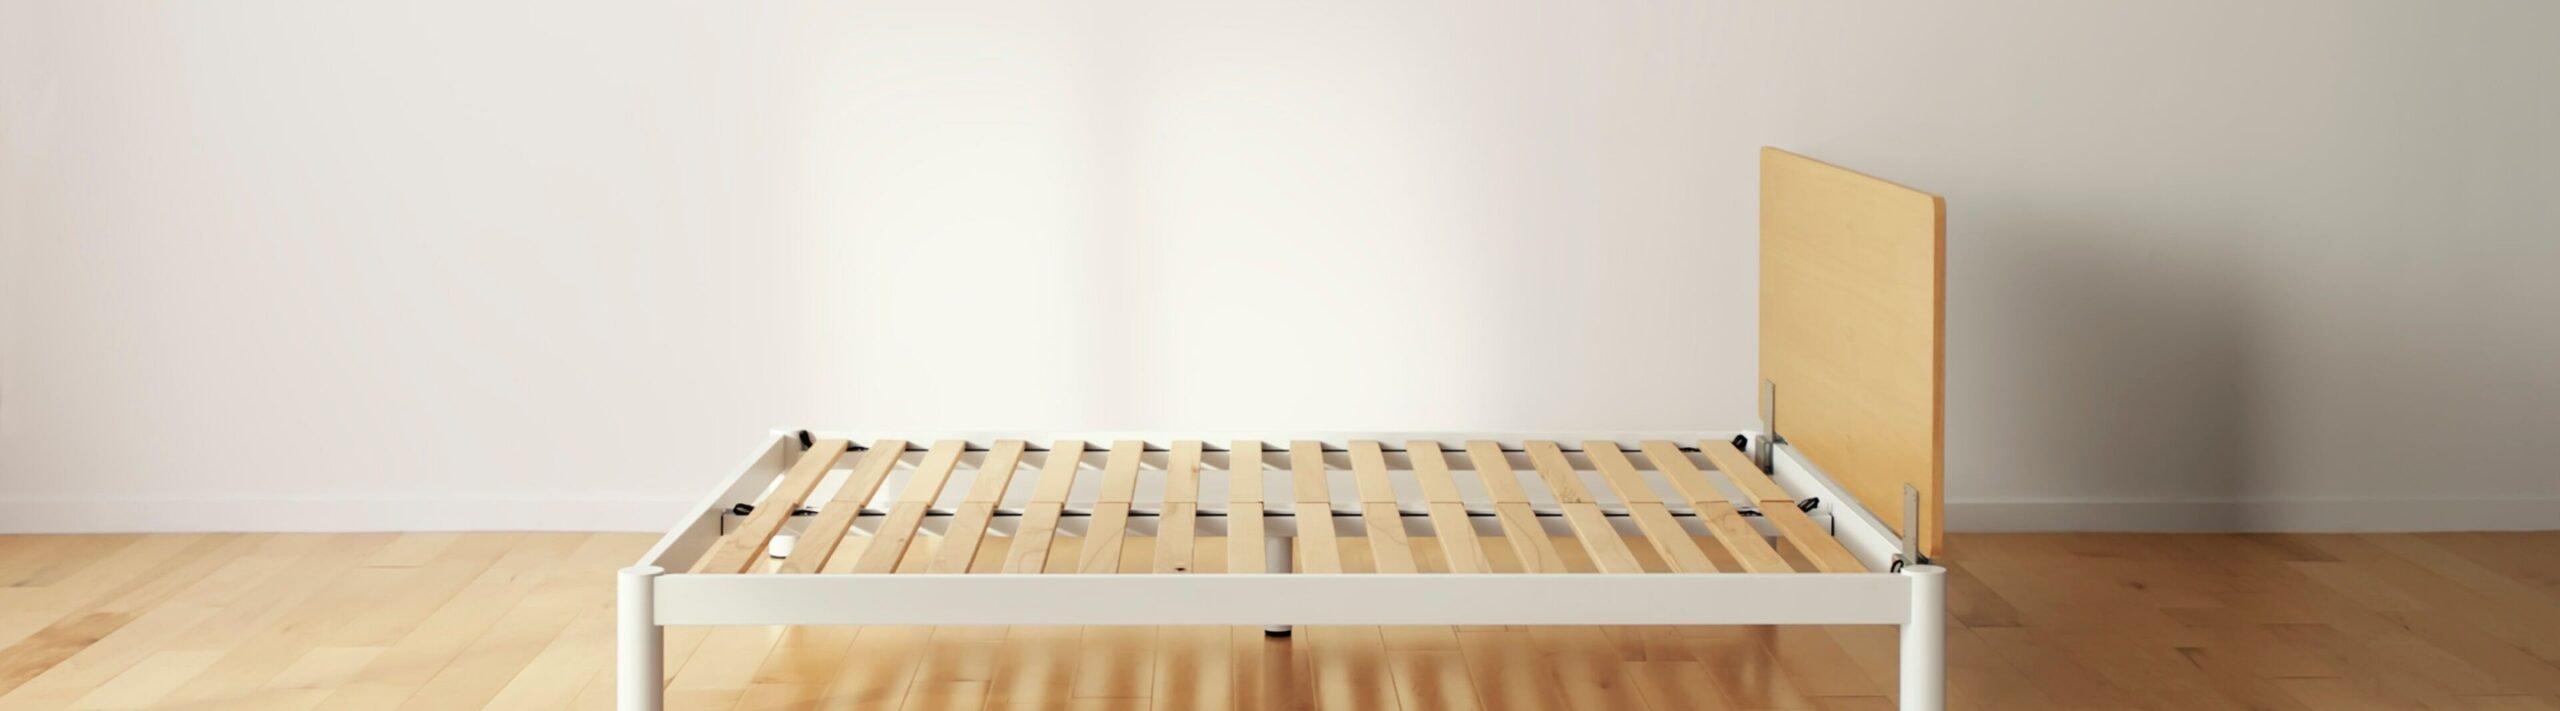 Wooden bed construction exposed